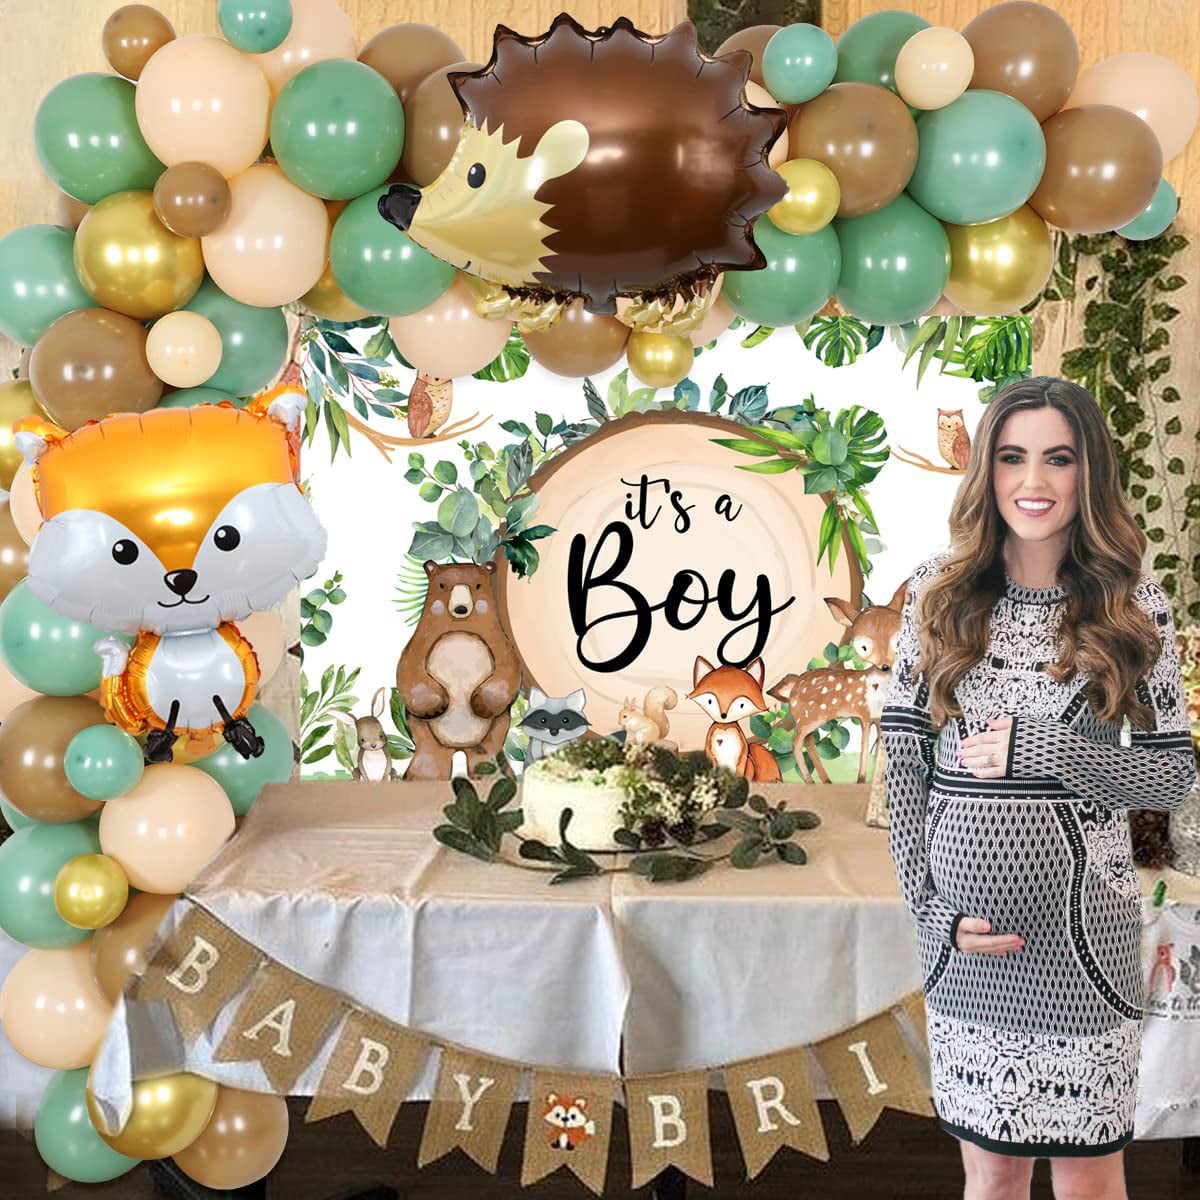 Woodland Baby Shower Woodland Fox Balloons Arch, Woodland Creatures Banner  Fawn Animal Friends Felt Garland Baby Shower Party Supplies Decorations